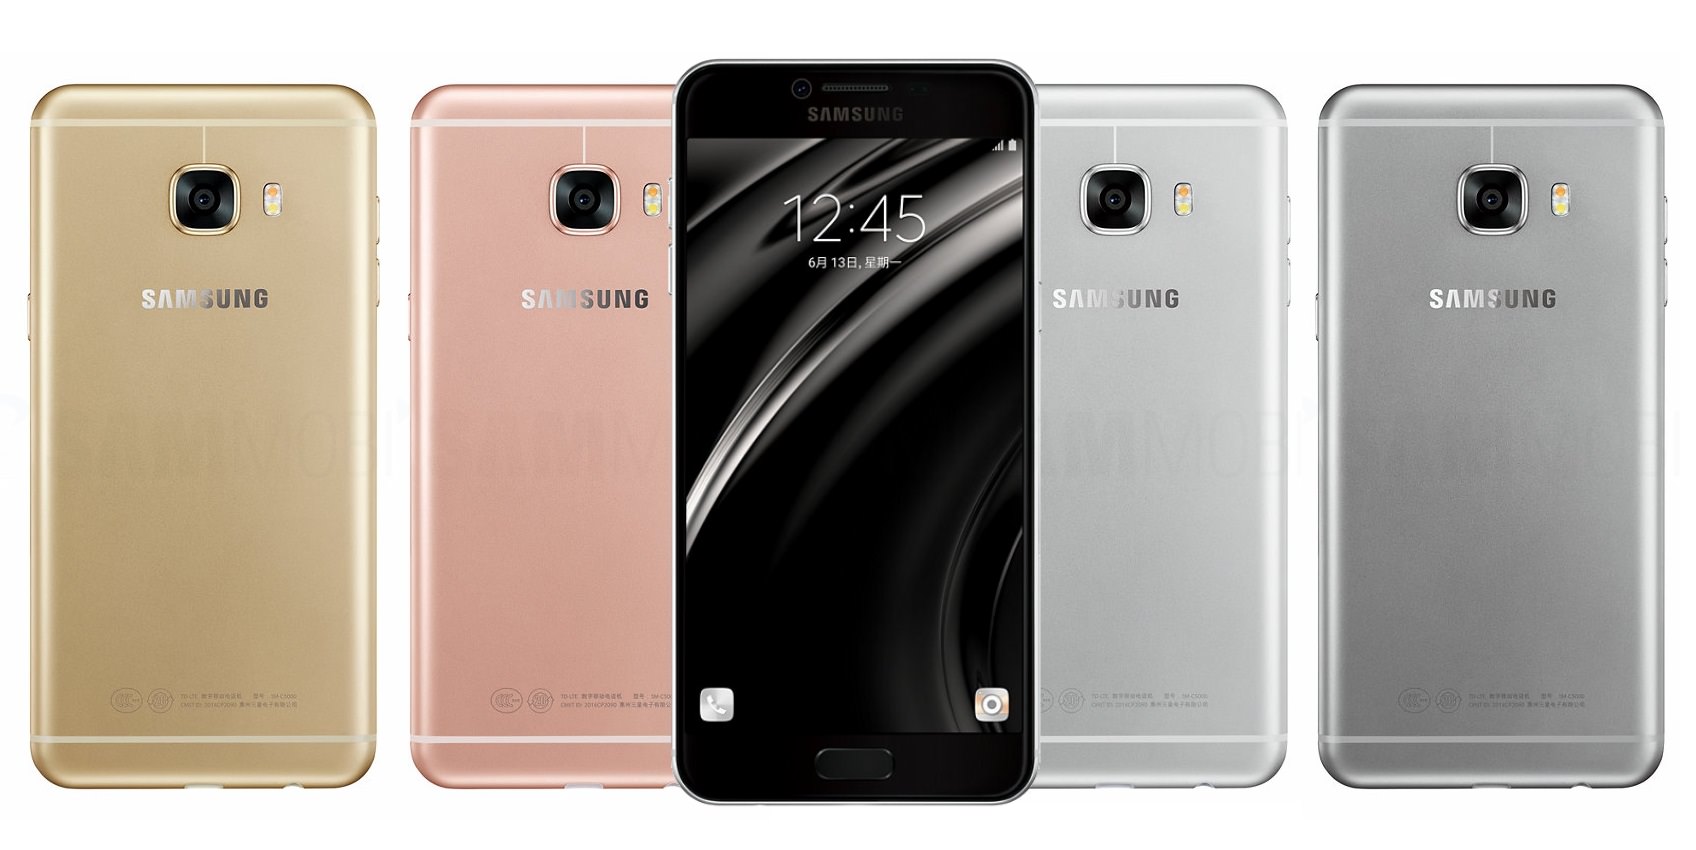 Samsung Galaxy C7 soon available to pre-order in the US